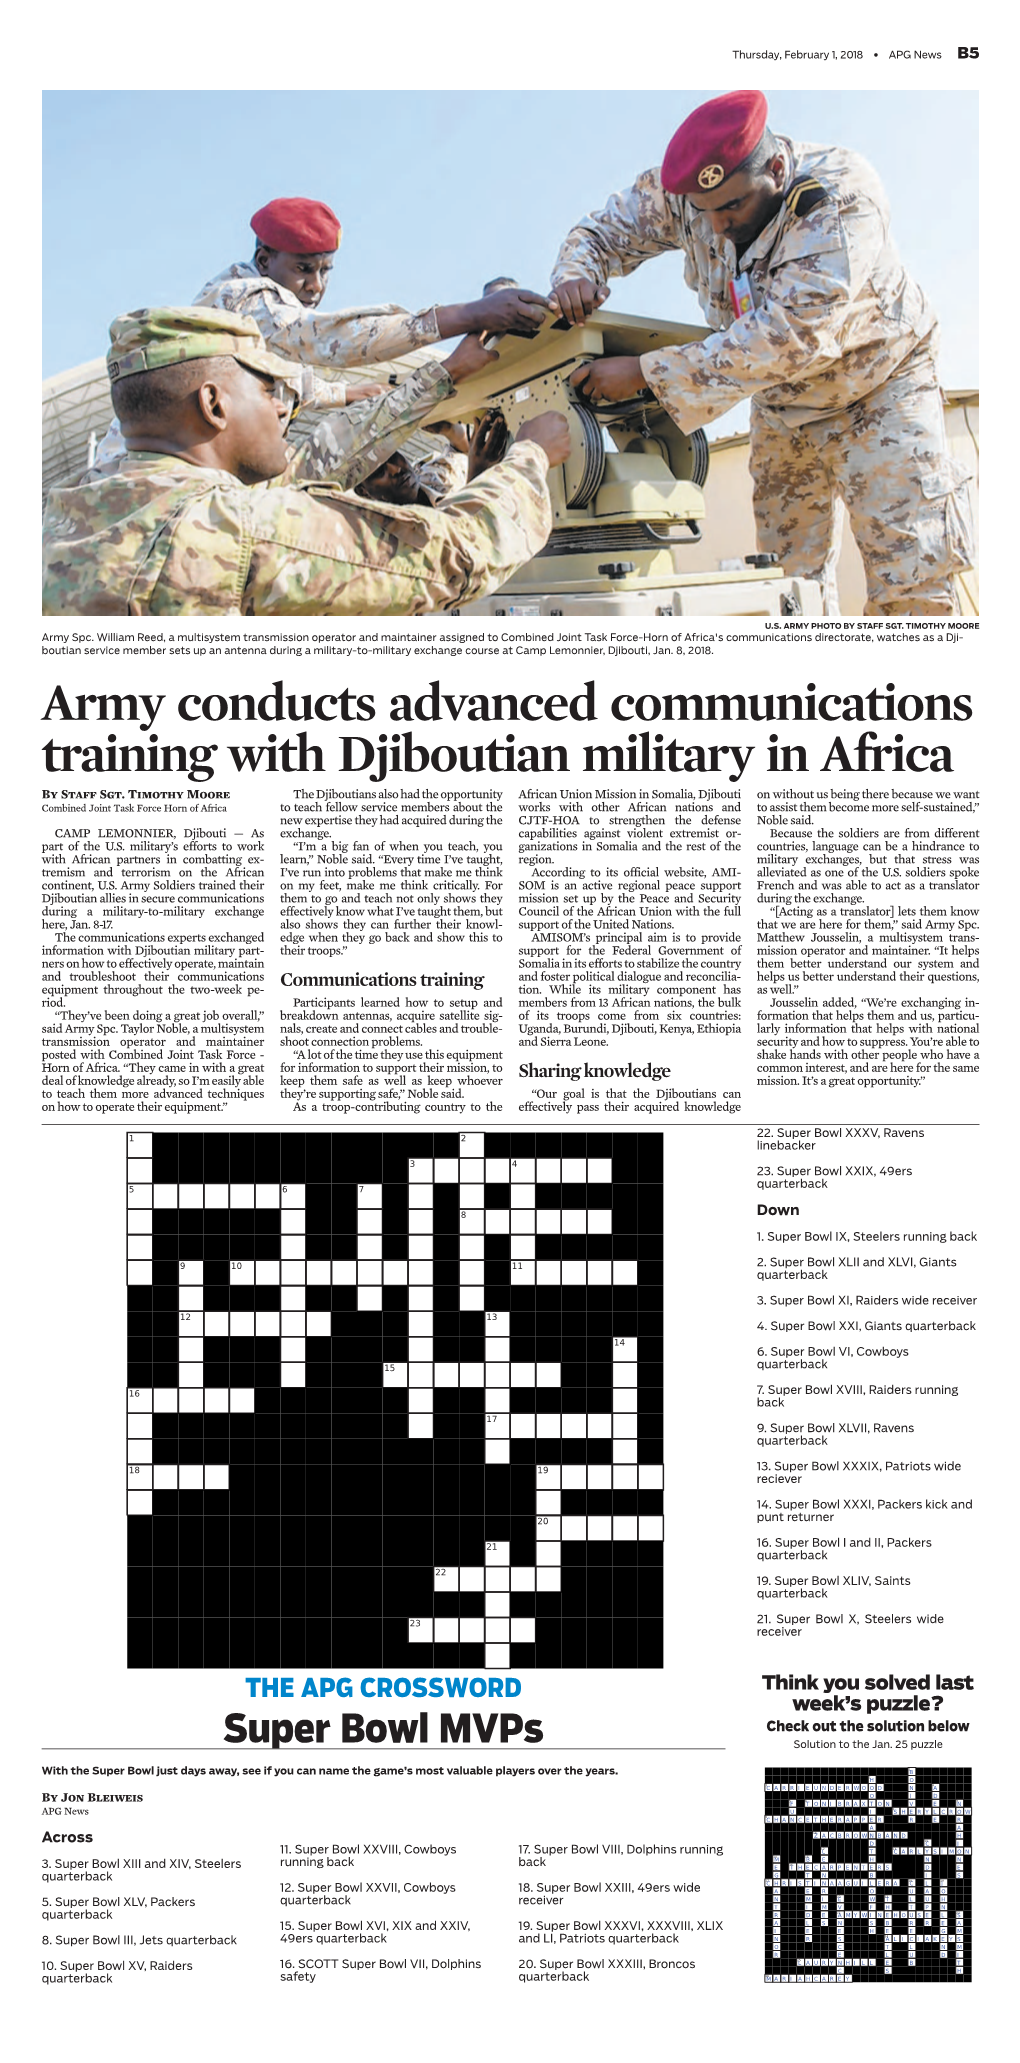 Army Conducts Advanced Communications Training with Djiboutian Military in Africa by Staff Sgt